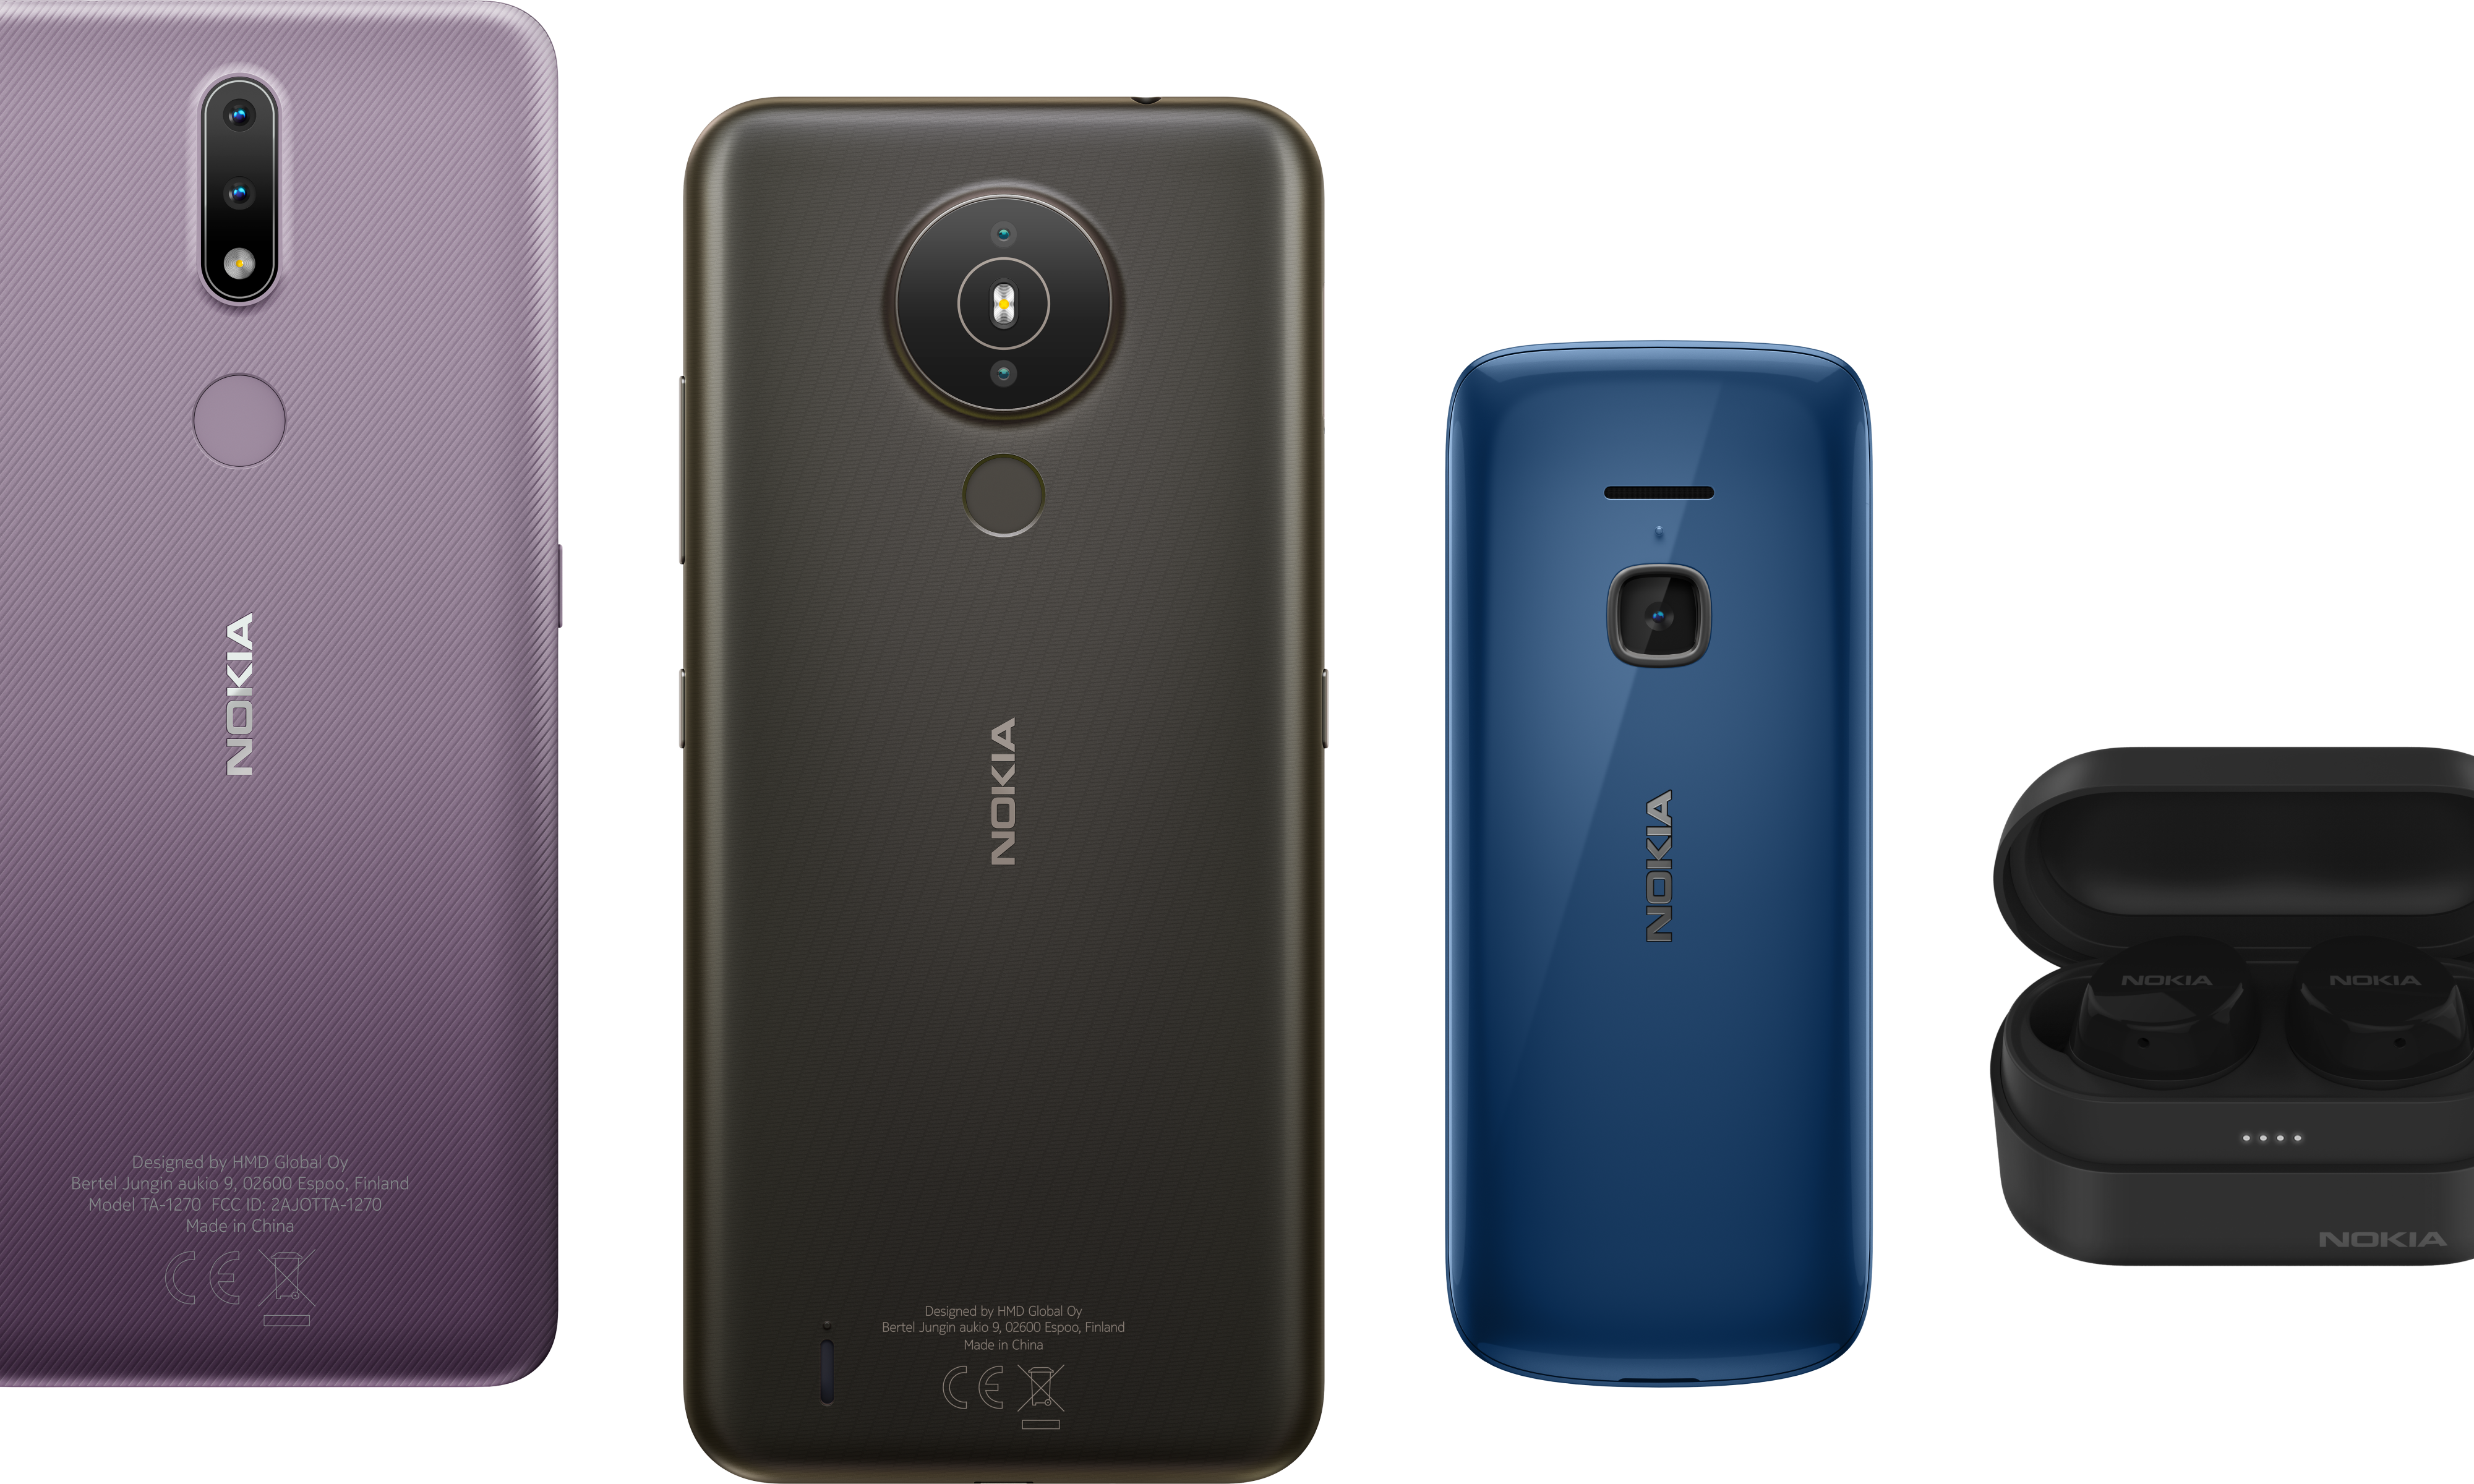 The latest Nokia Android smartphones and mobile phones